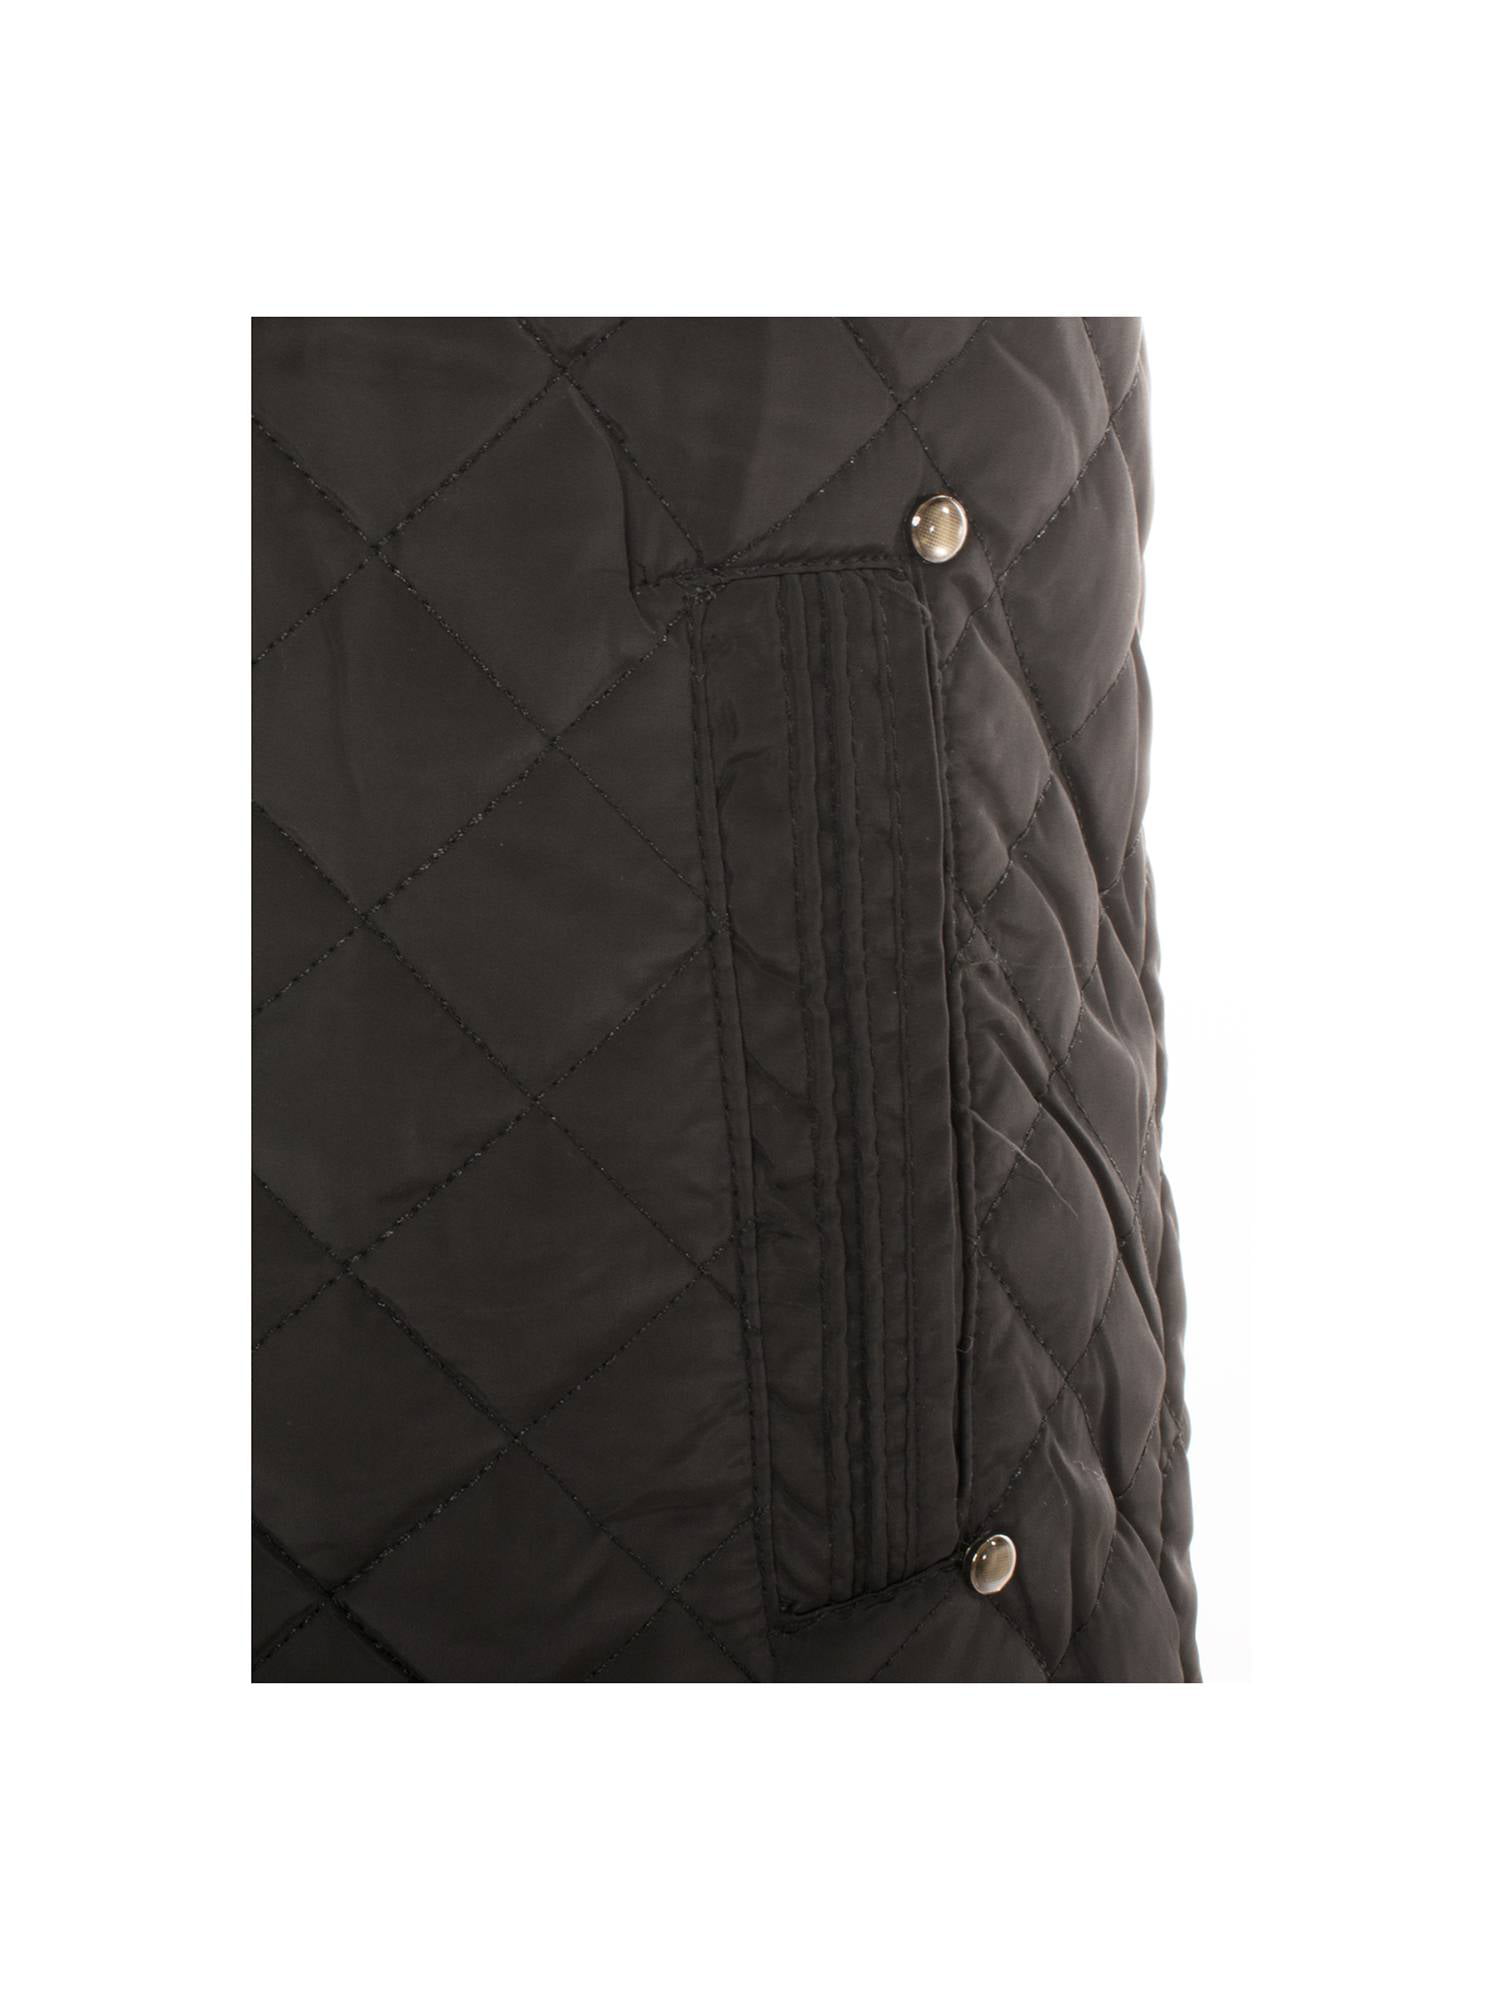 Alta Designer Fashion Men's Outerwear Diamond-Quilted Padded Full Zip Jackets 